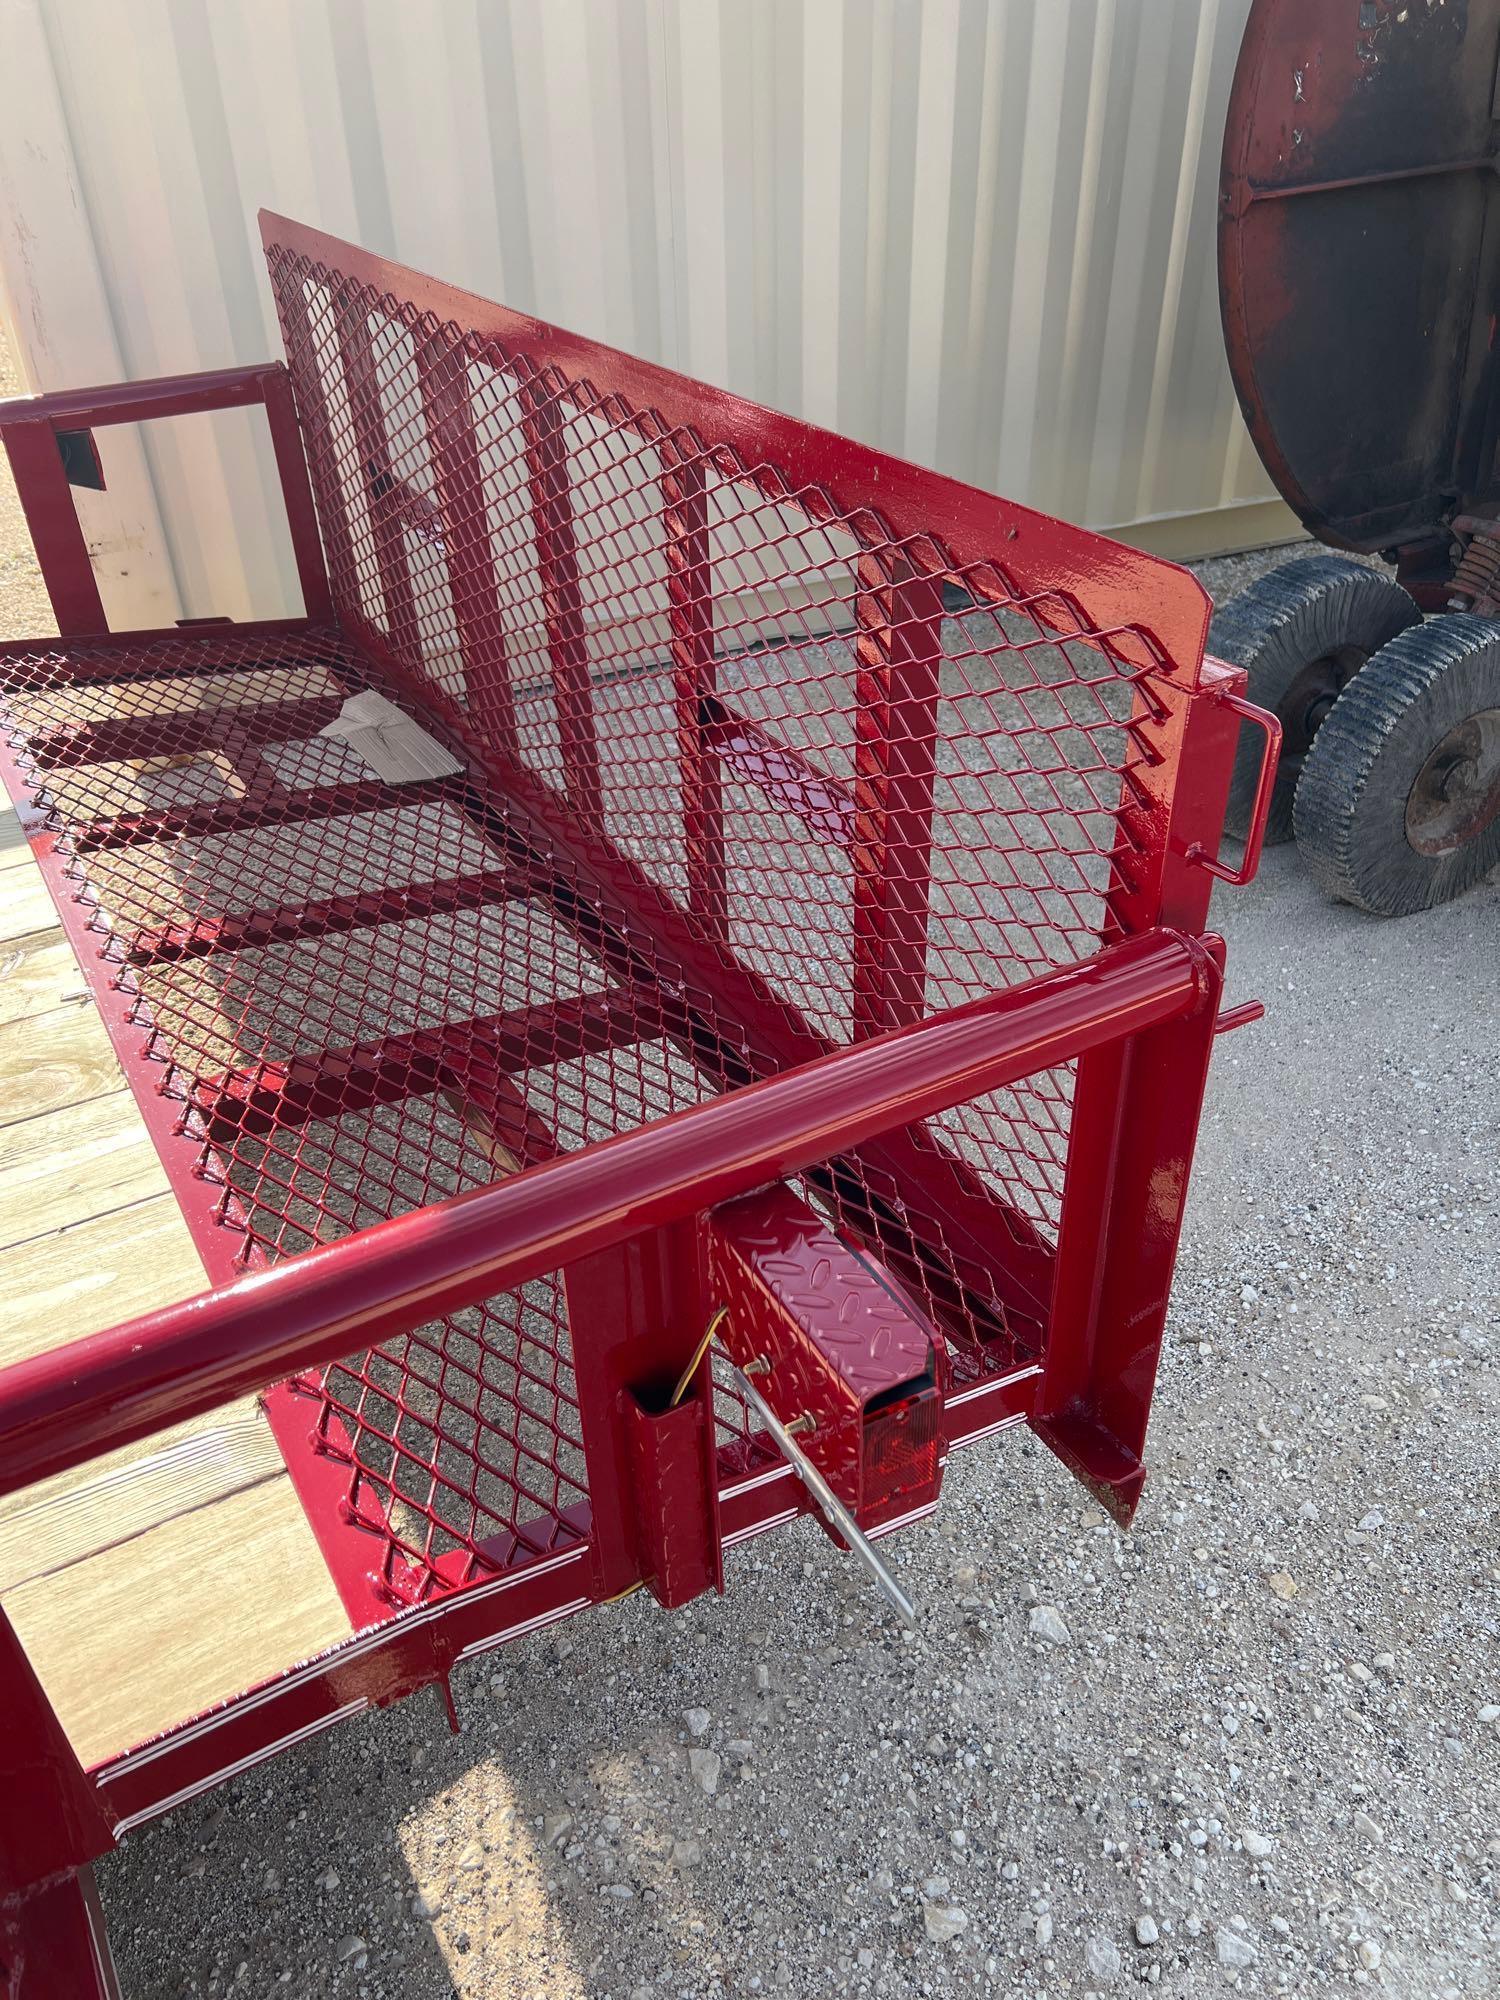 2024 Double A 83"X14' Bumper Pull Utility Trailer with Pipe Top Rail and Fold-Up Ramps - RED 2 -